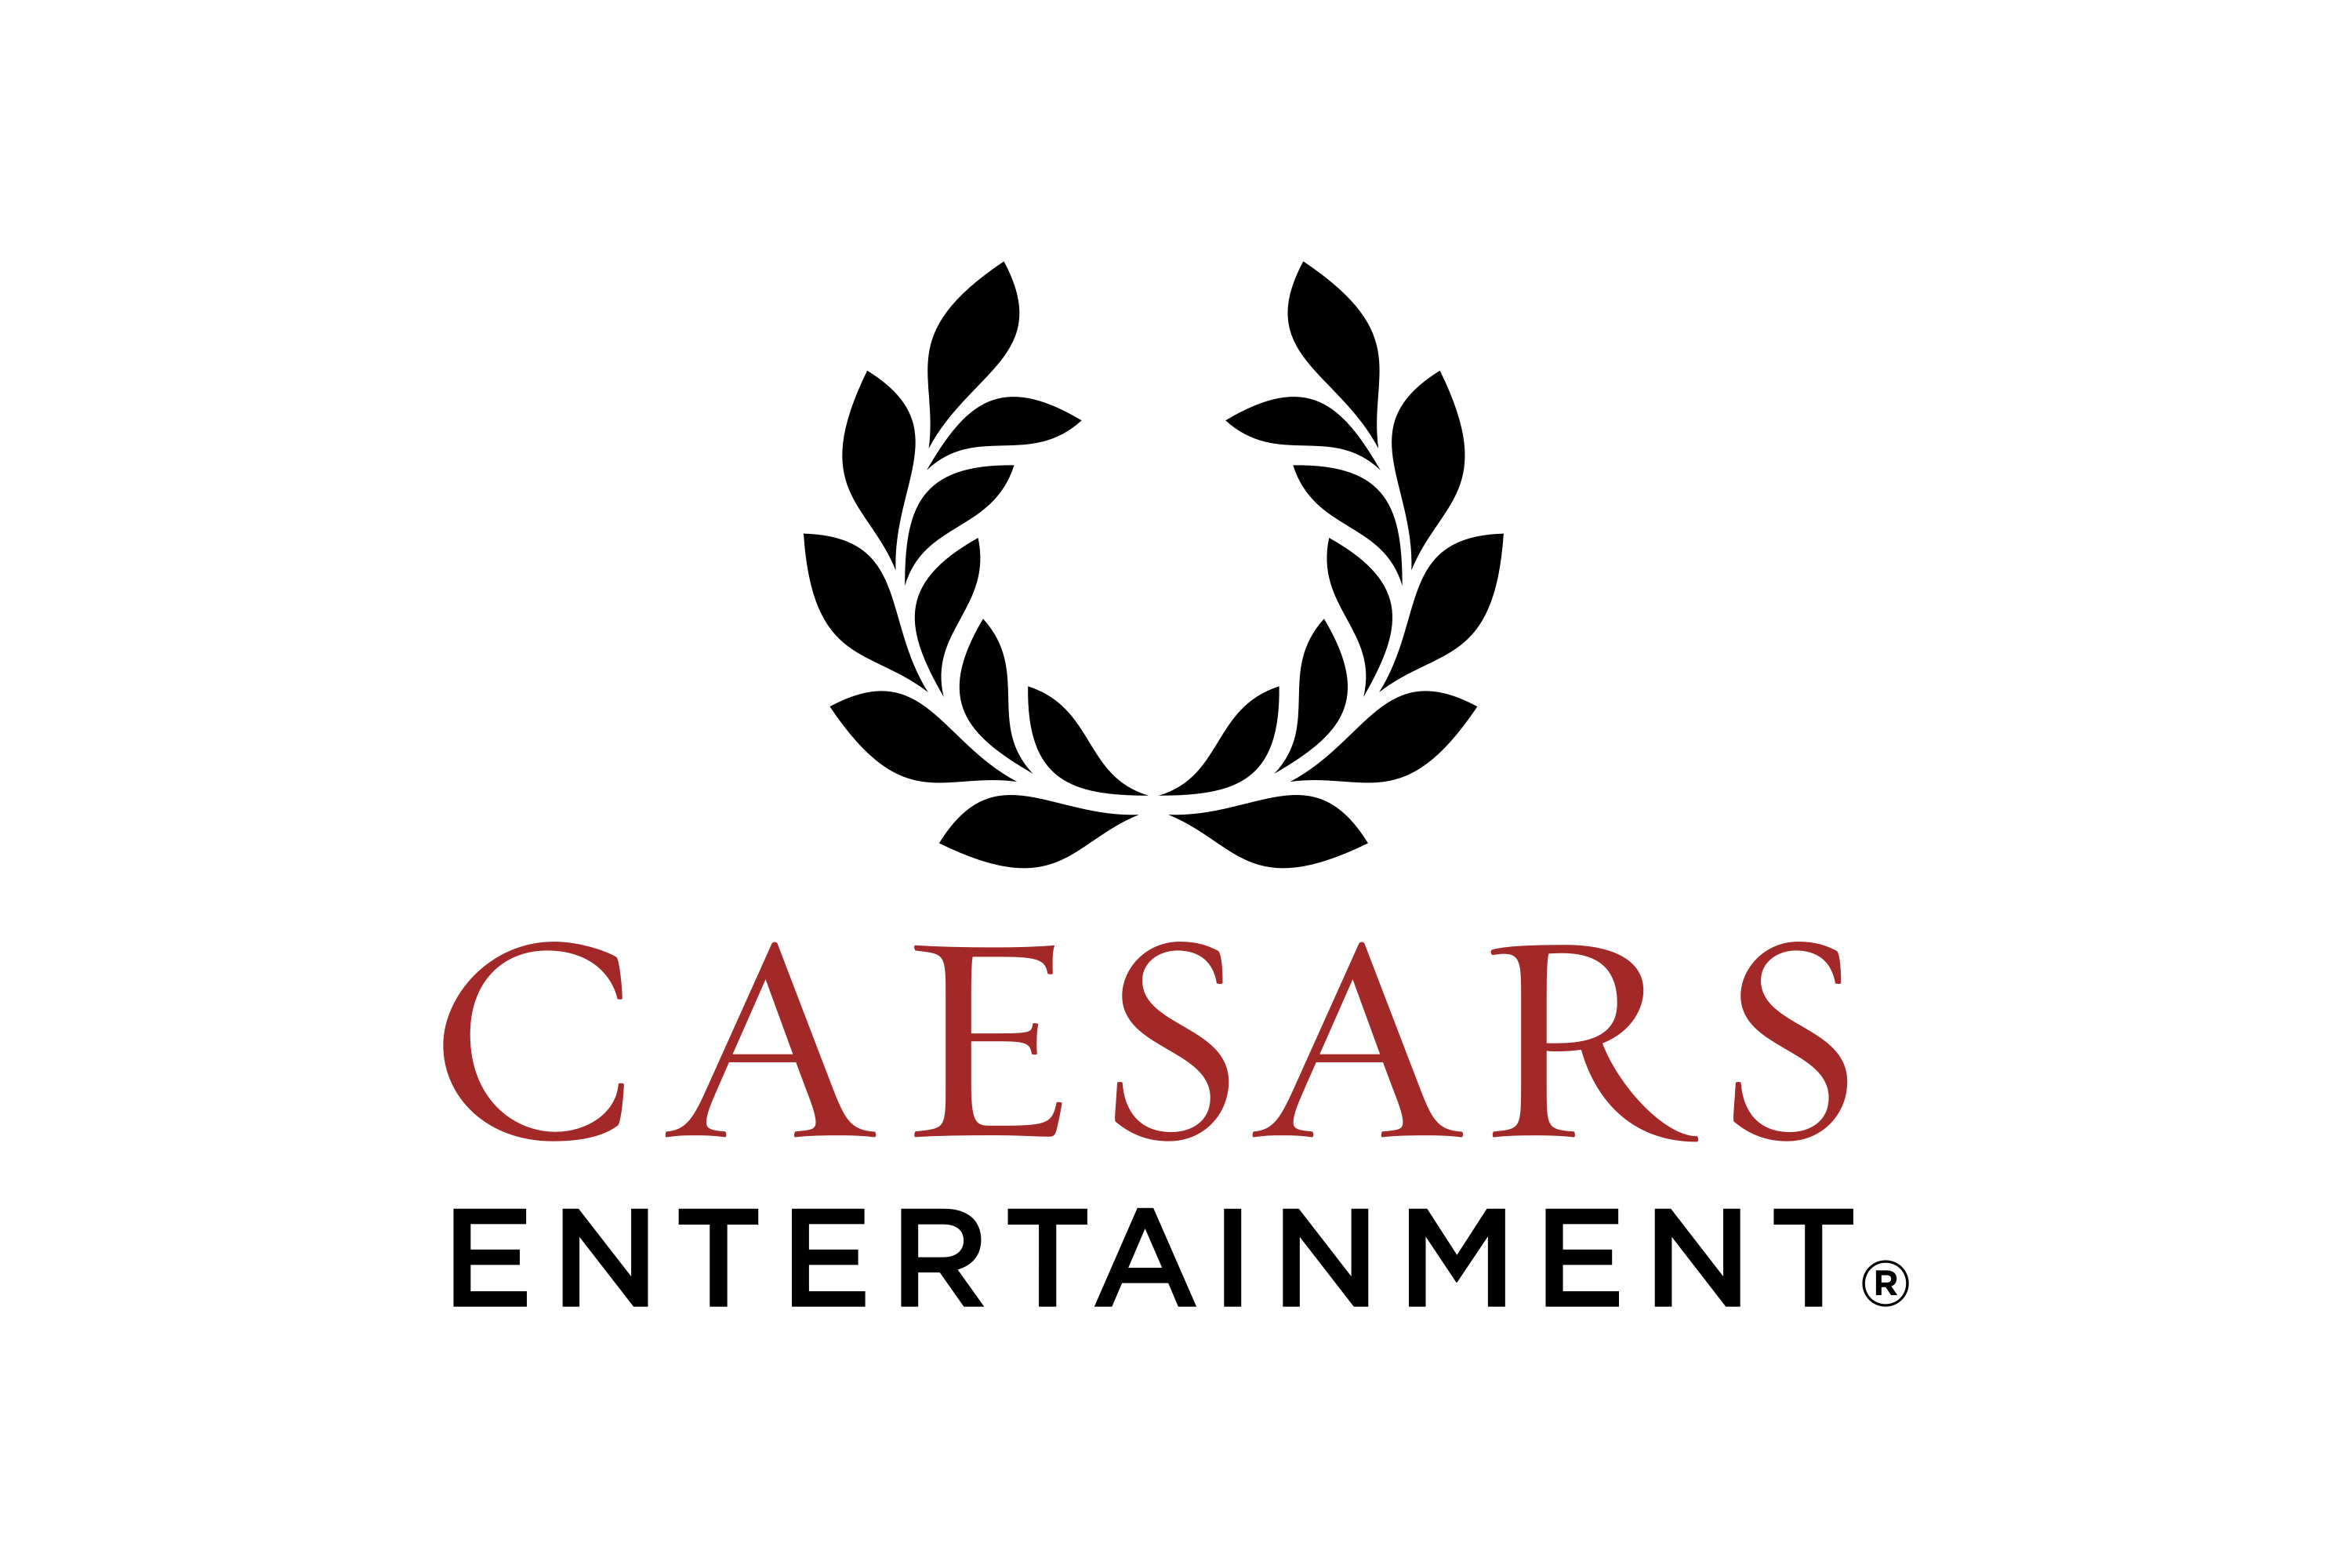 Download Caesars Entertainment Corporation Logo in SVG Vector or PNG